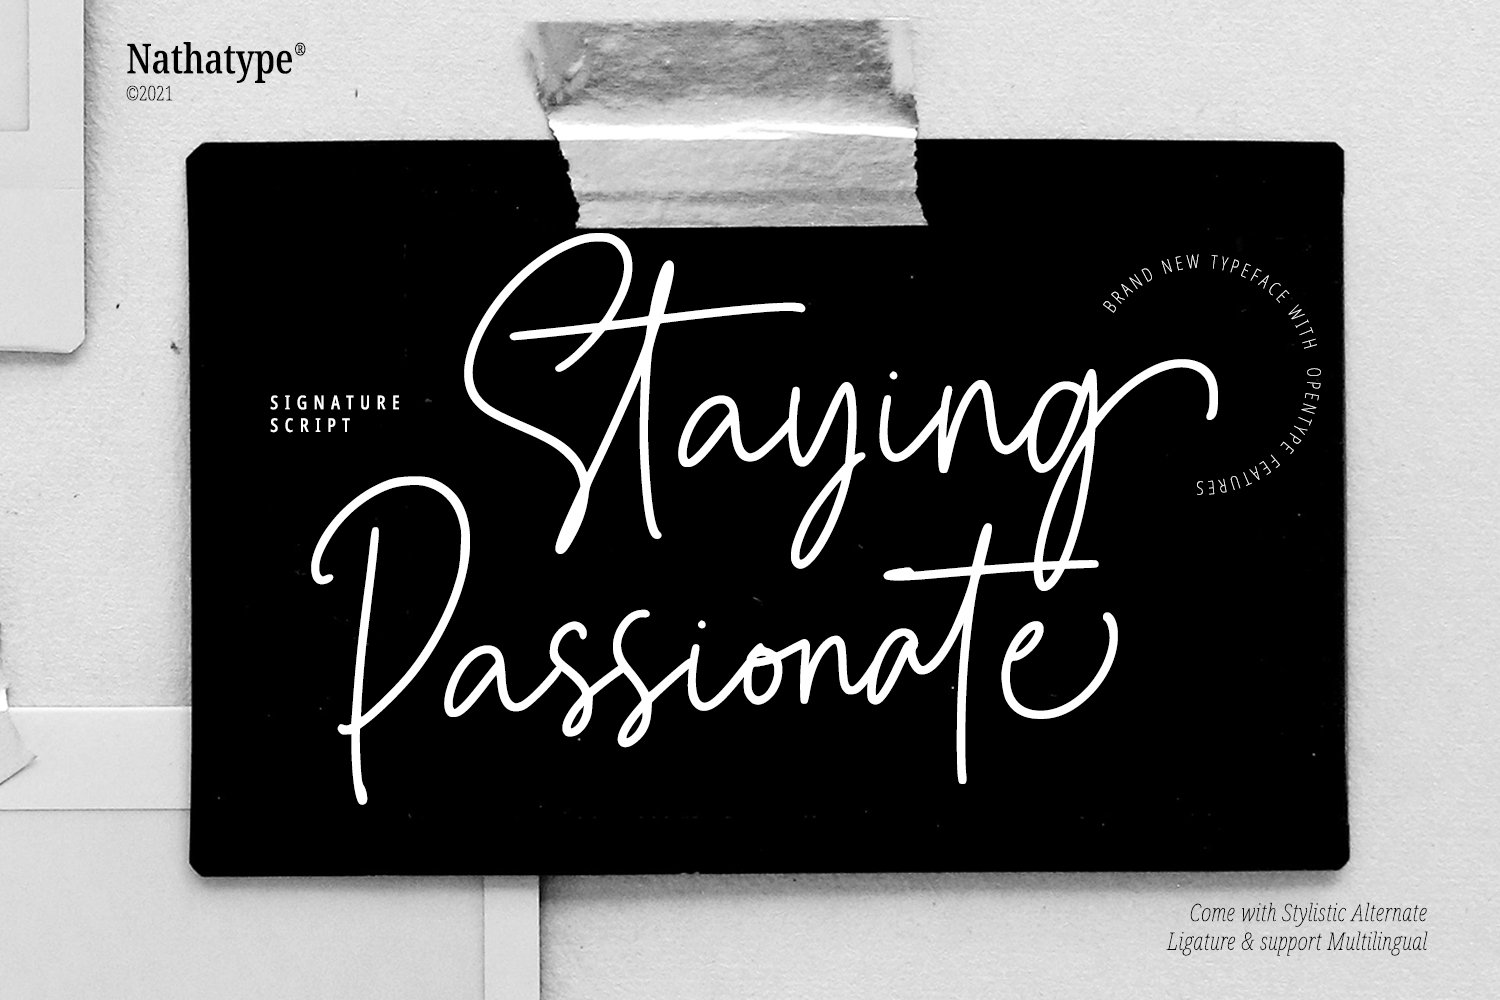 Staying Passionate cover image.